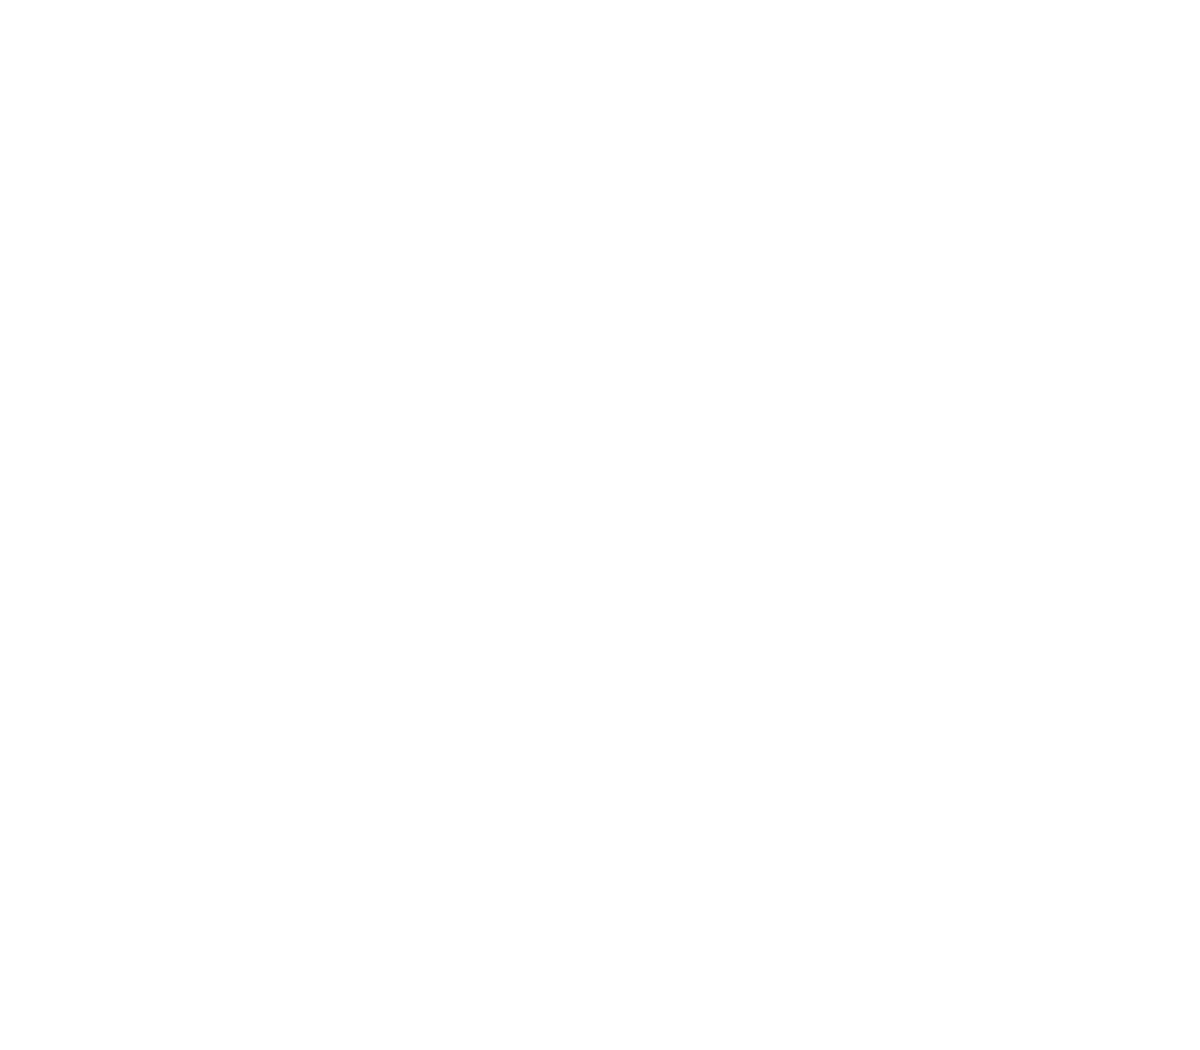 FRIENDS OF THE CEMETERY